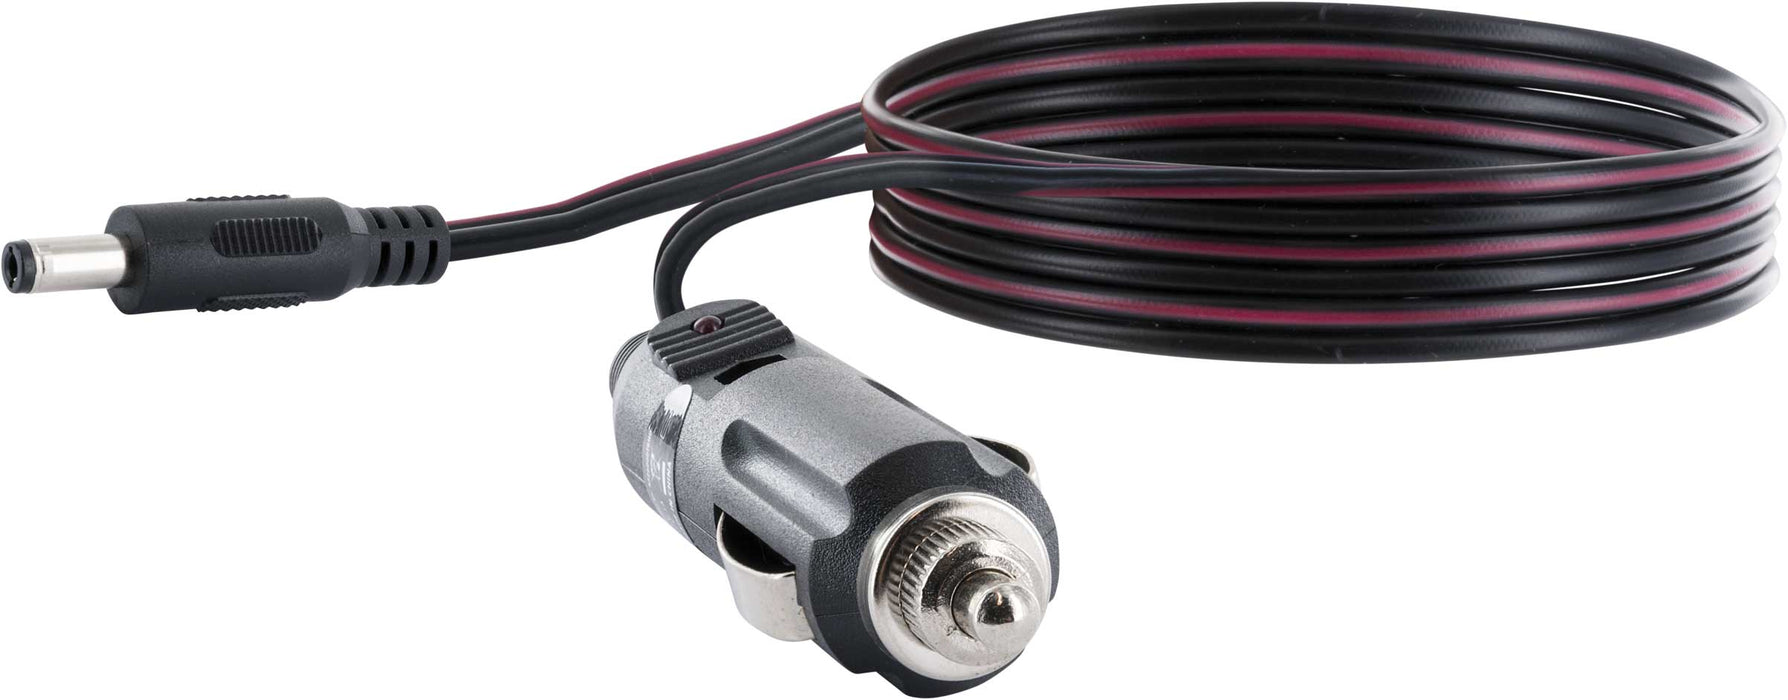 Vehicle connection cable